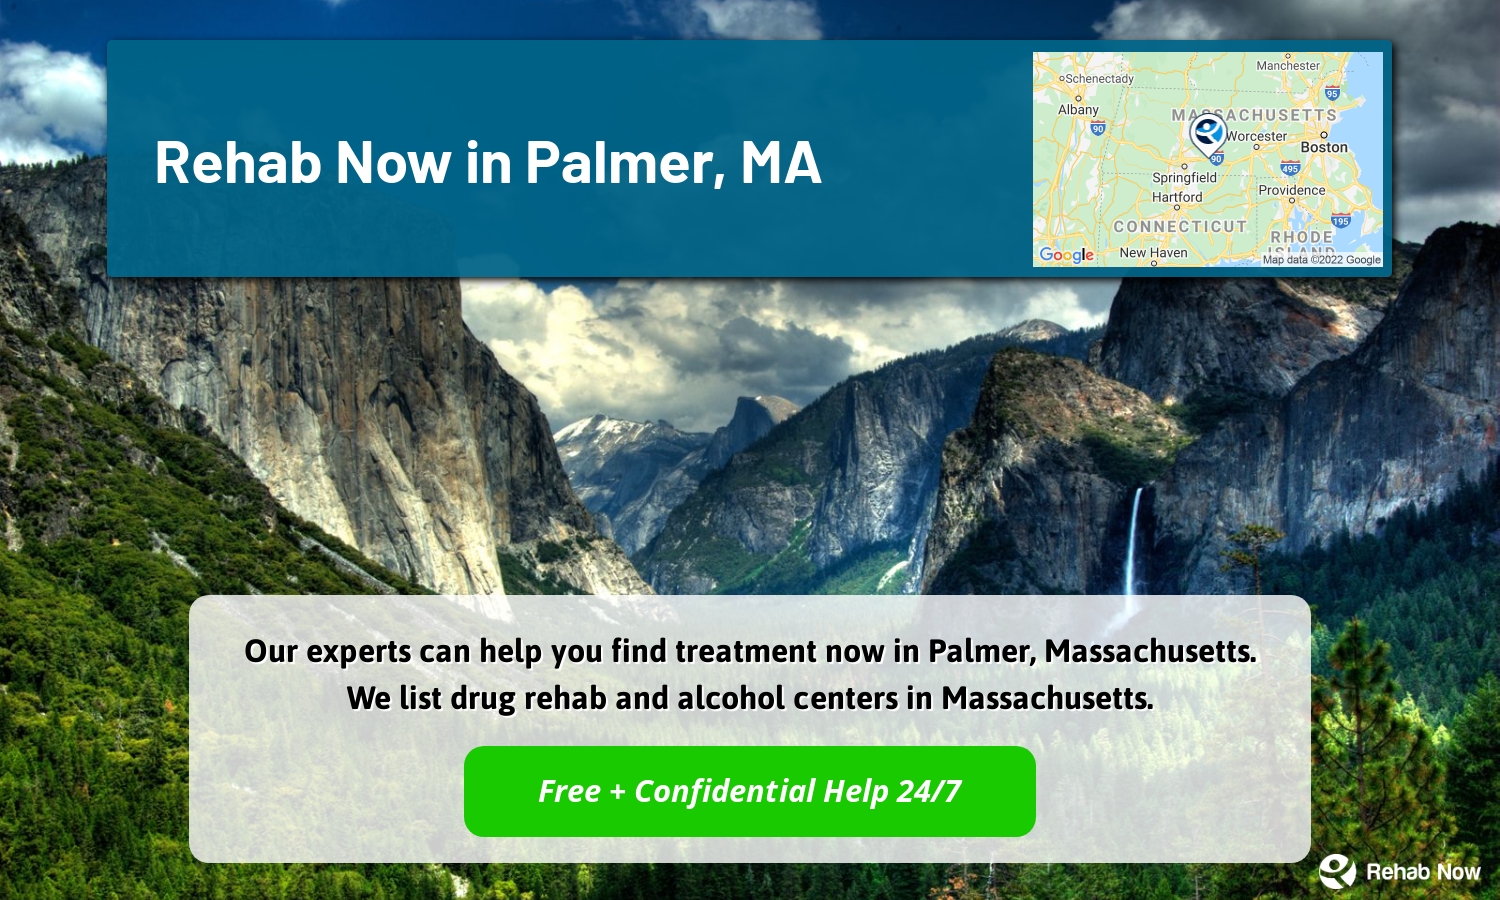 Our experts can help you find treatment now in Palmer, Massachusetts. We list drug rehab and alcohol centers in Massachusetts.